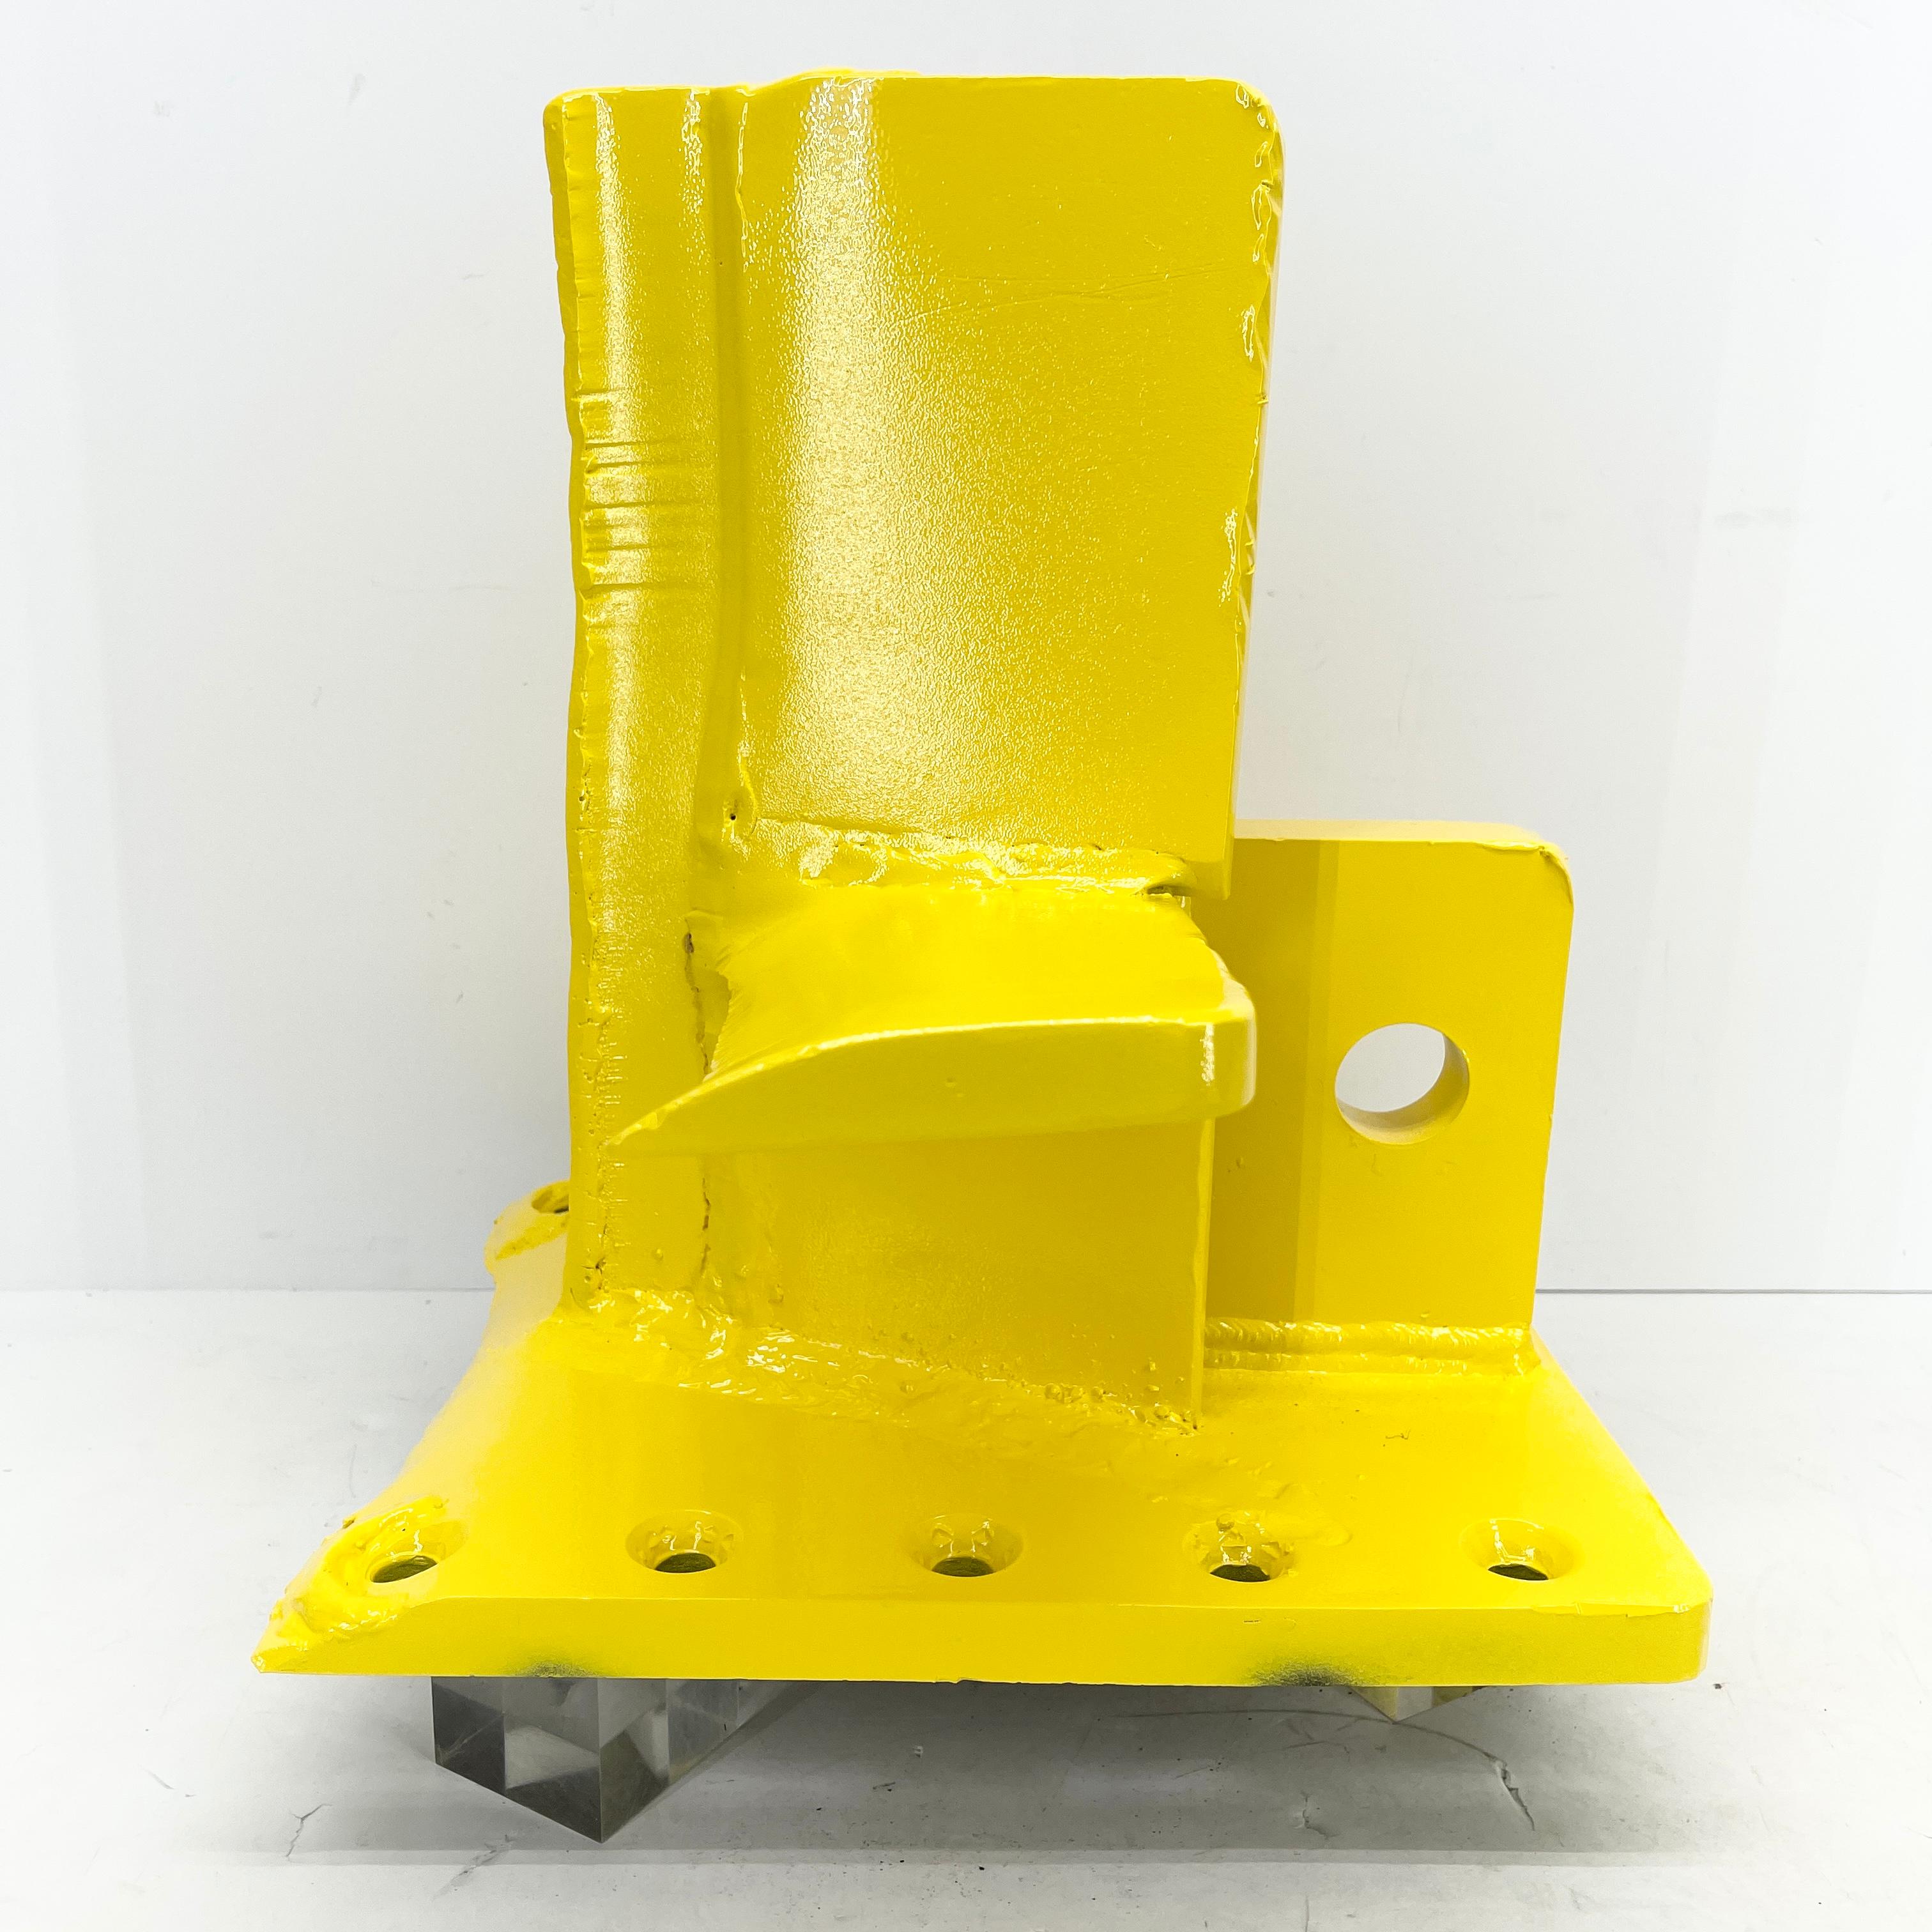 Bright Sunshine Yellow Abstract Eagle Head Sculpture From a 3 Way Wood Splitter For Sale 4